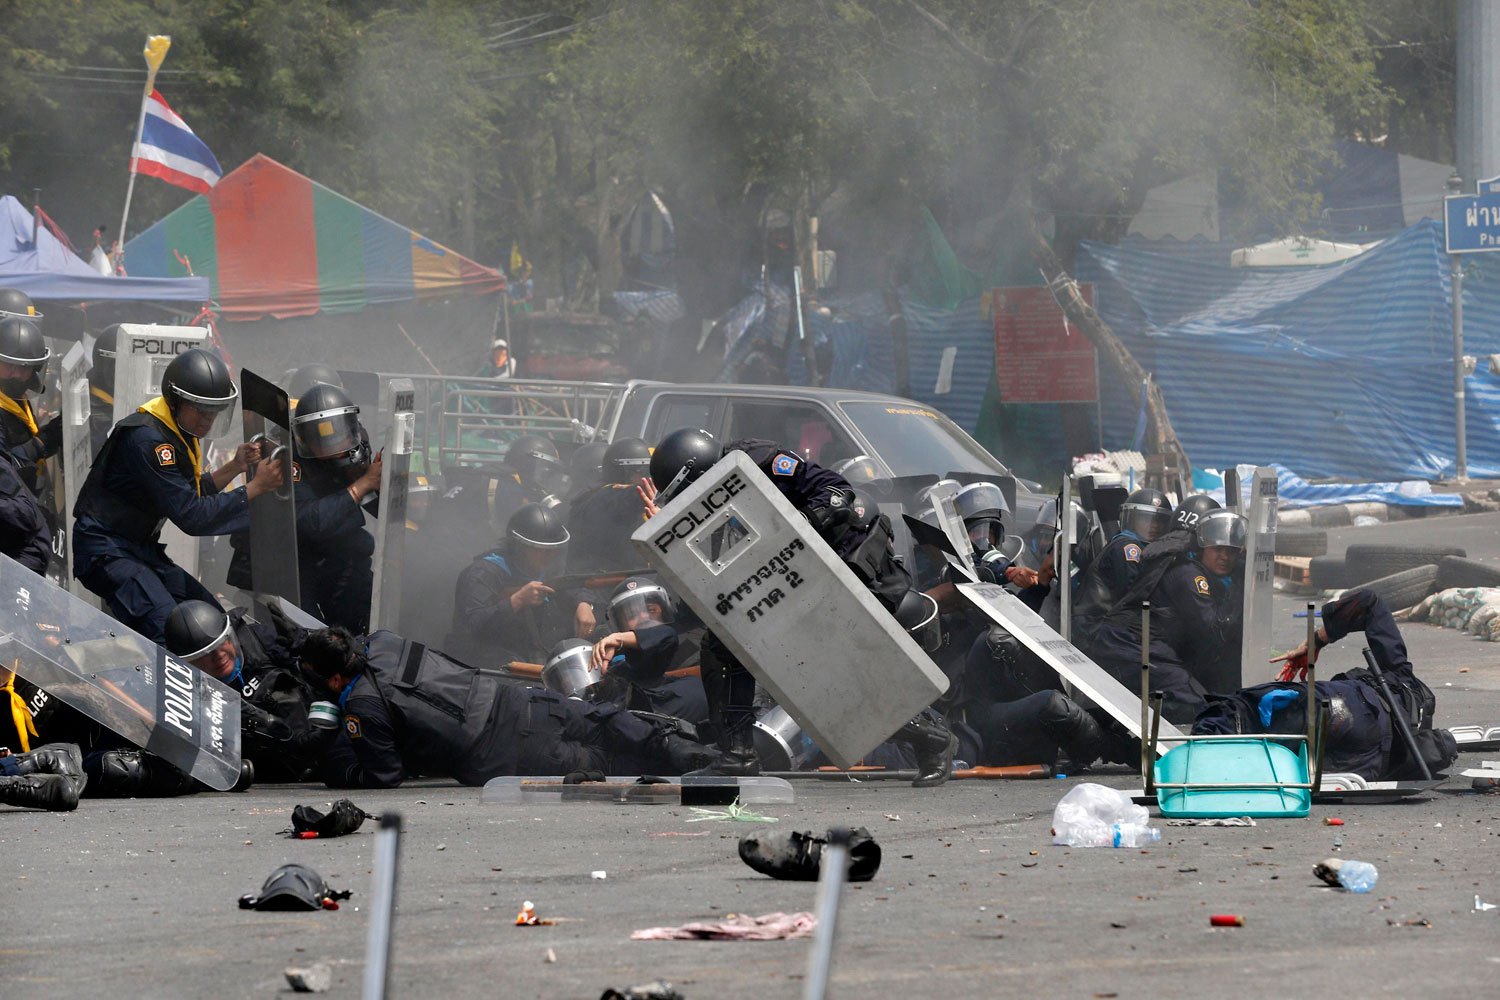 Thai police officers react after an explosion during clashes with anti-government protesters near Government House in Bangkok, on Feb. 18, 2014.